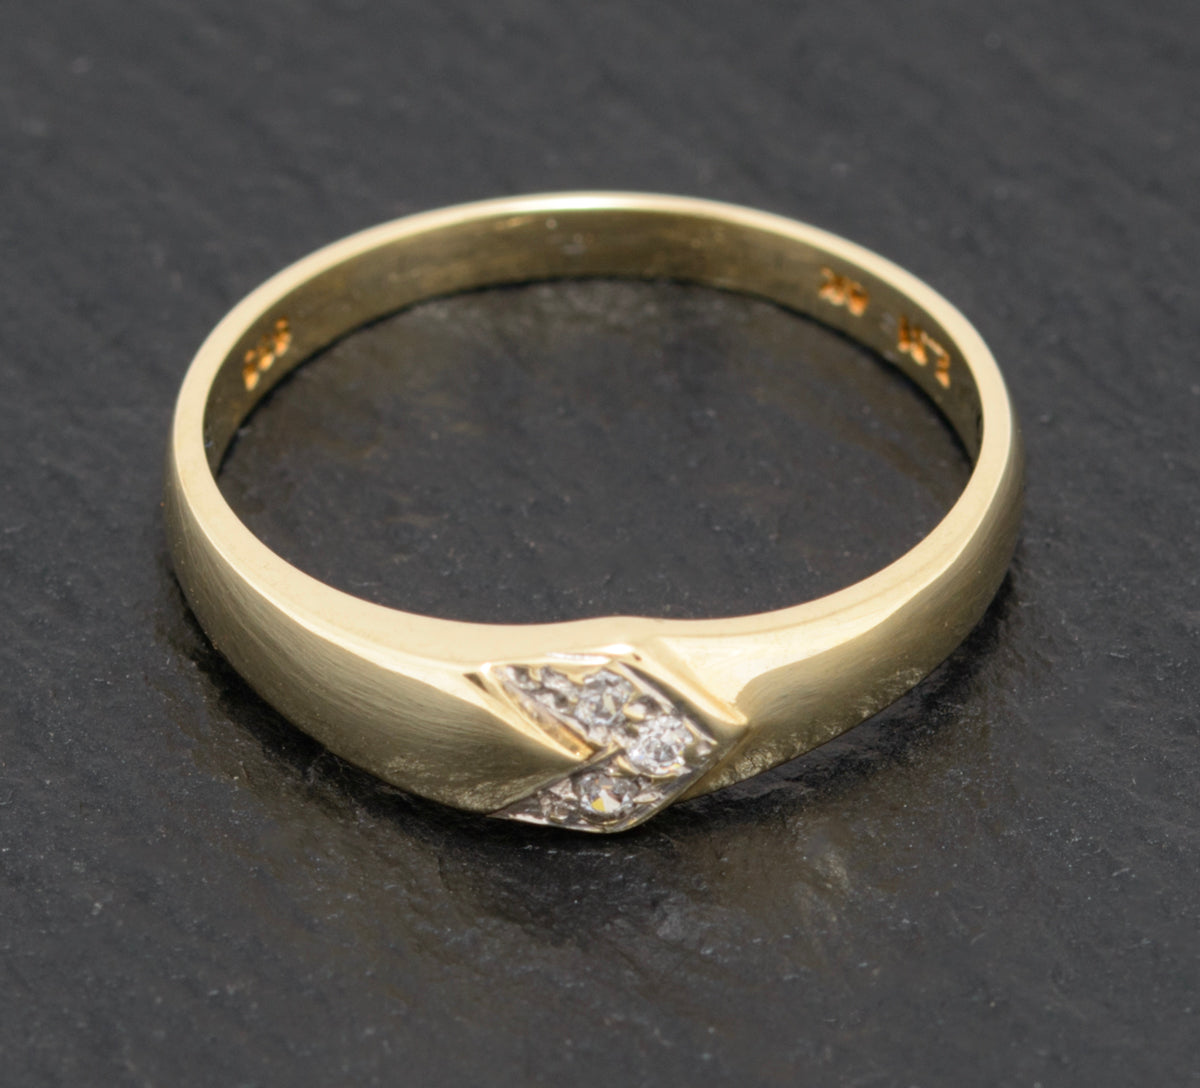 Modern Stylish 14ct Gold Ring With Chevron Detail & CZ Gemstones Size P1/2 (A1585)